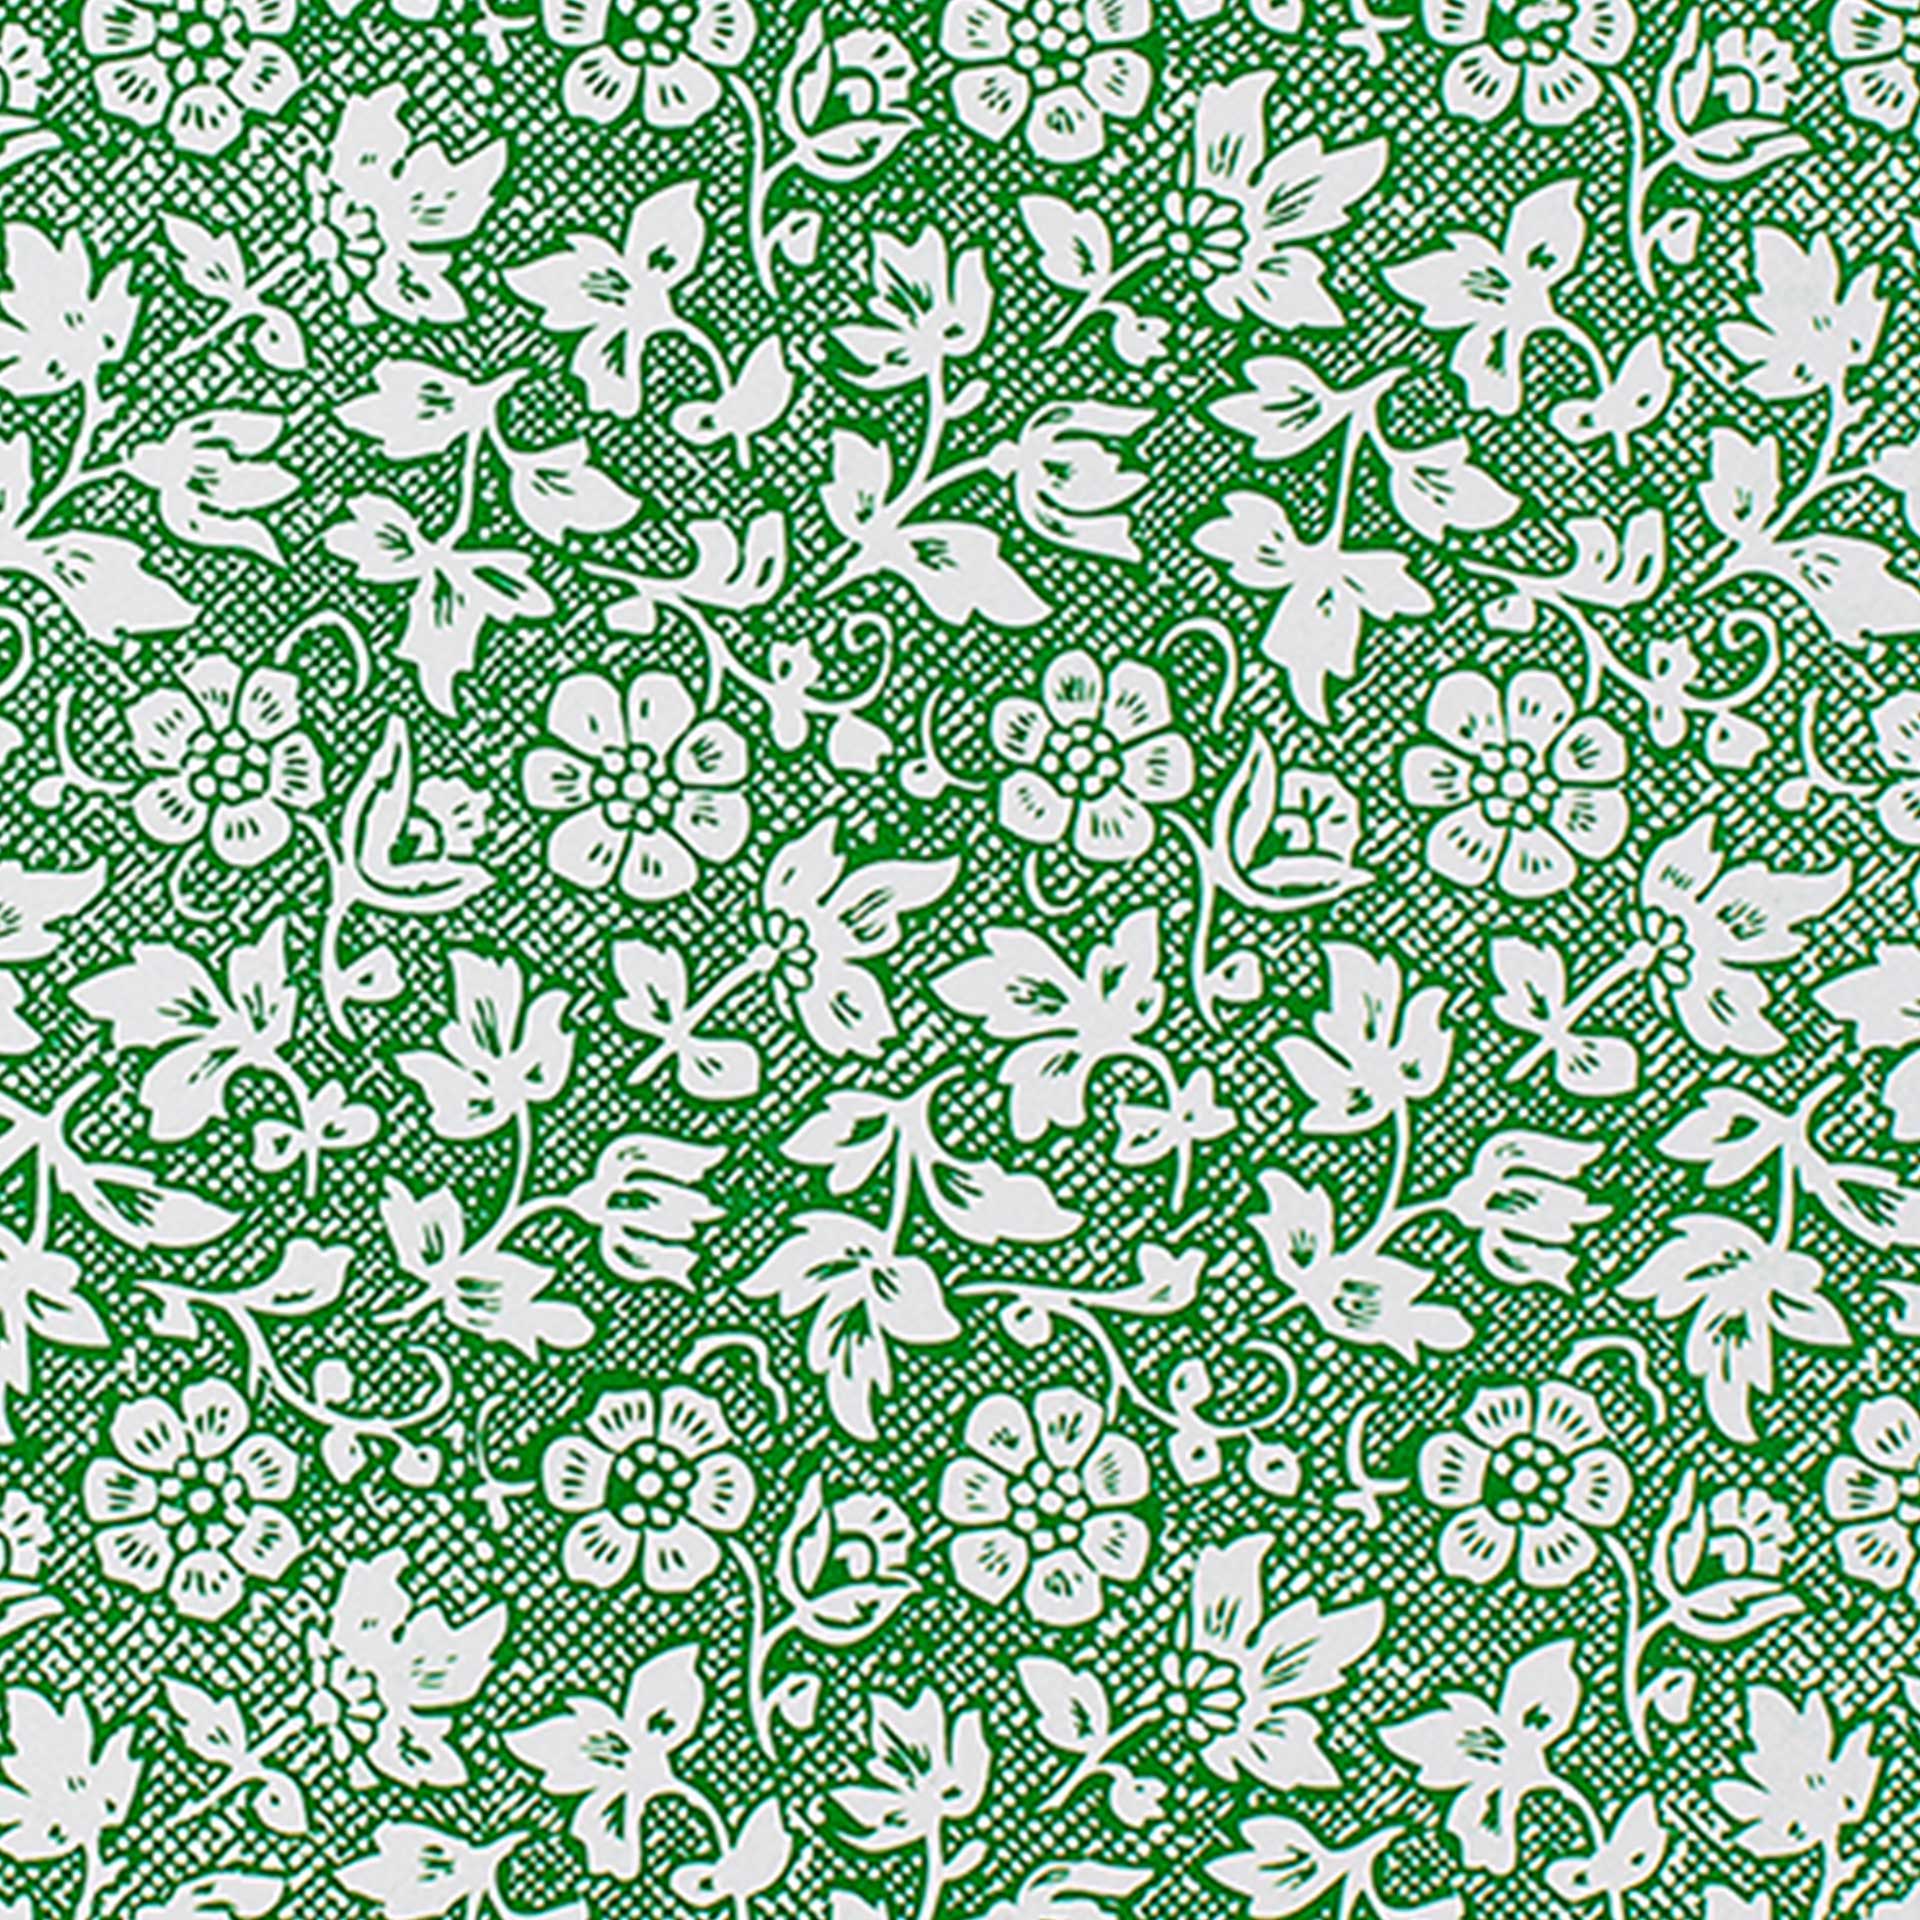 Closeup of printed green and white flowers